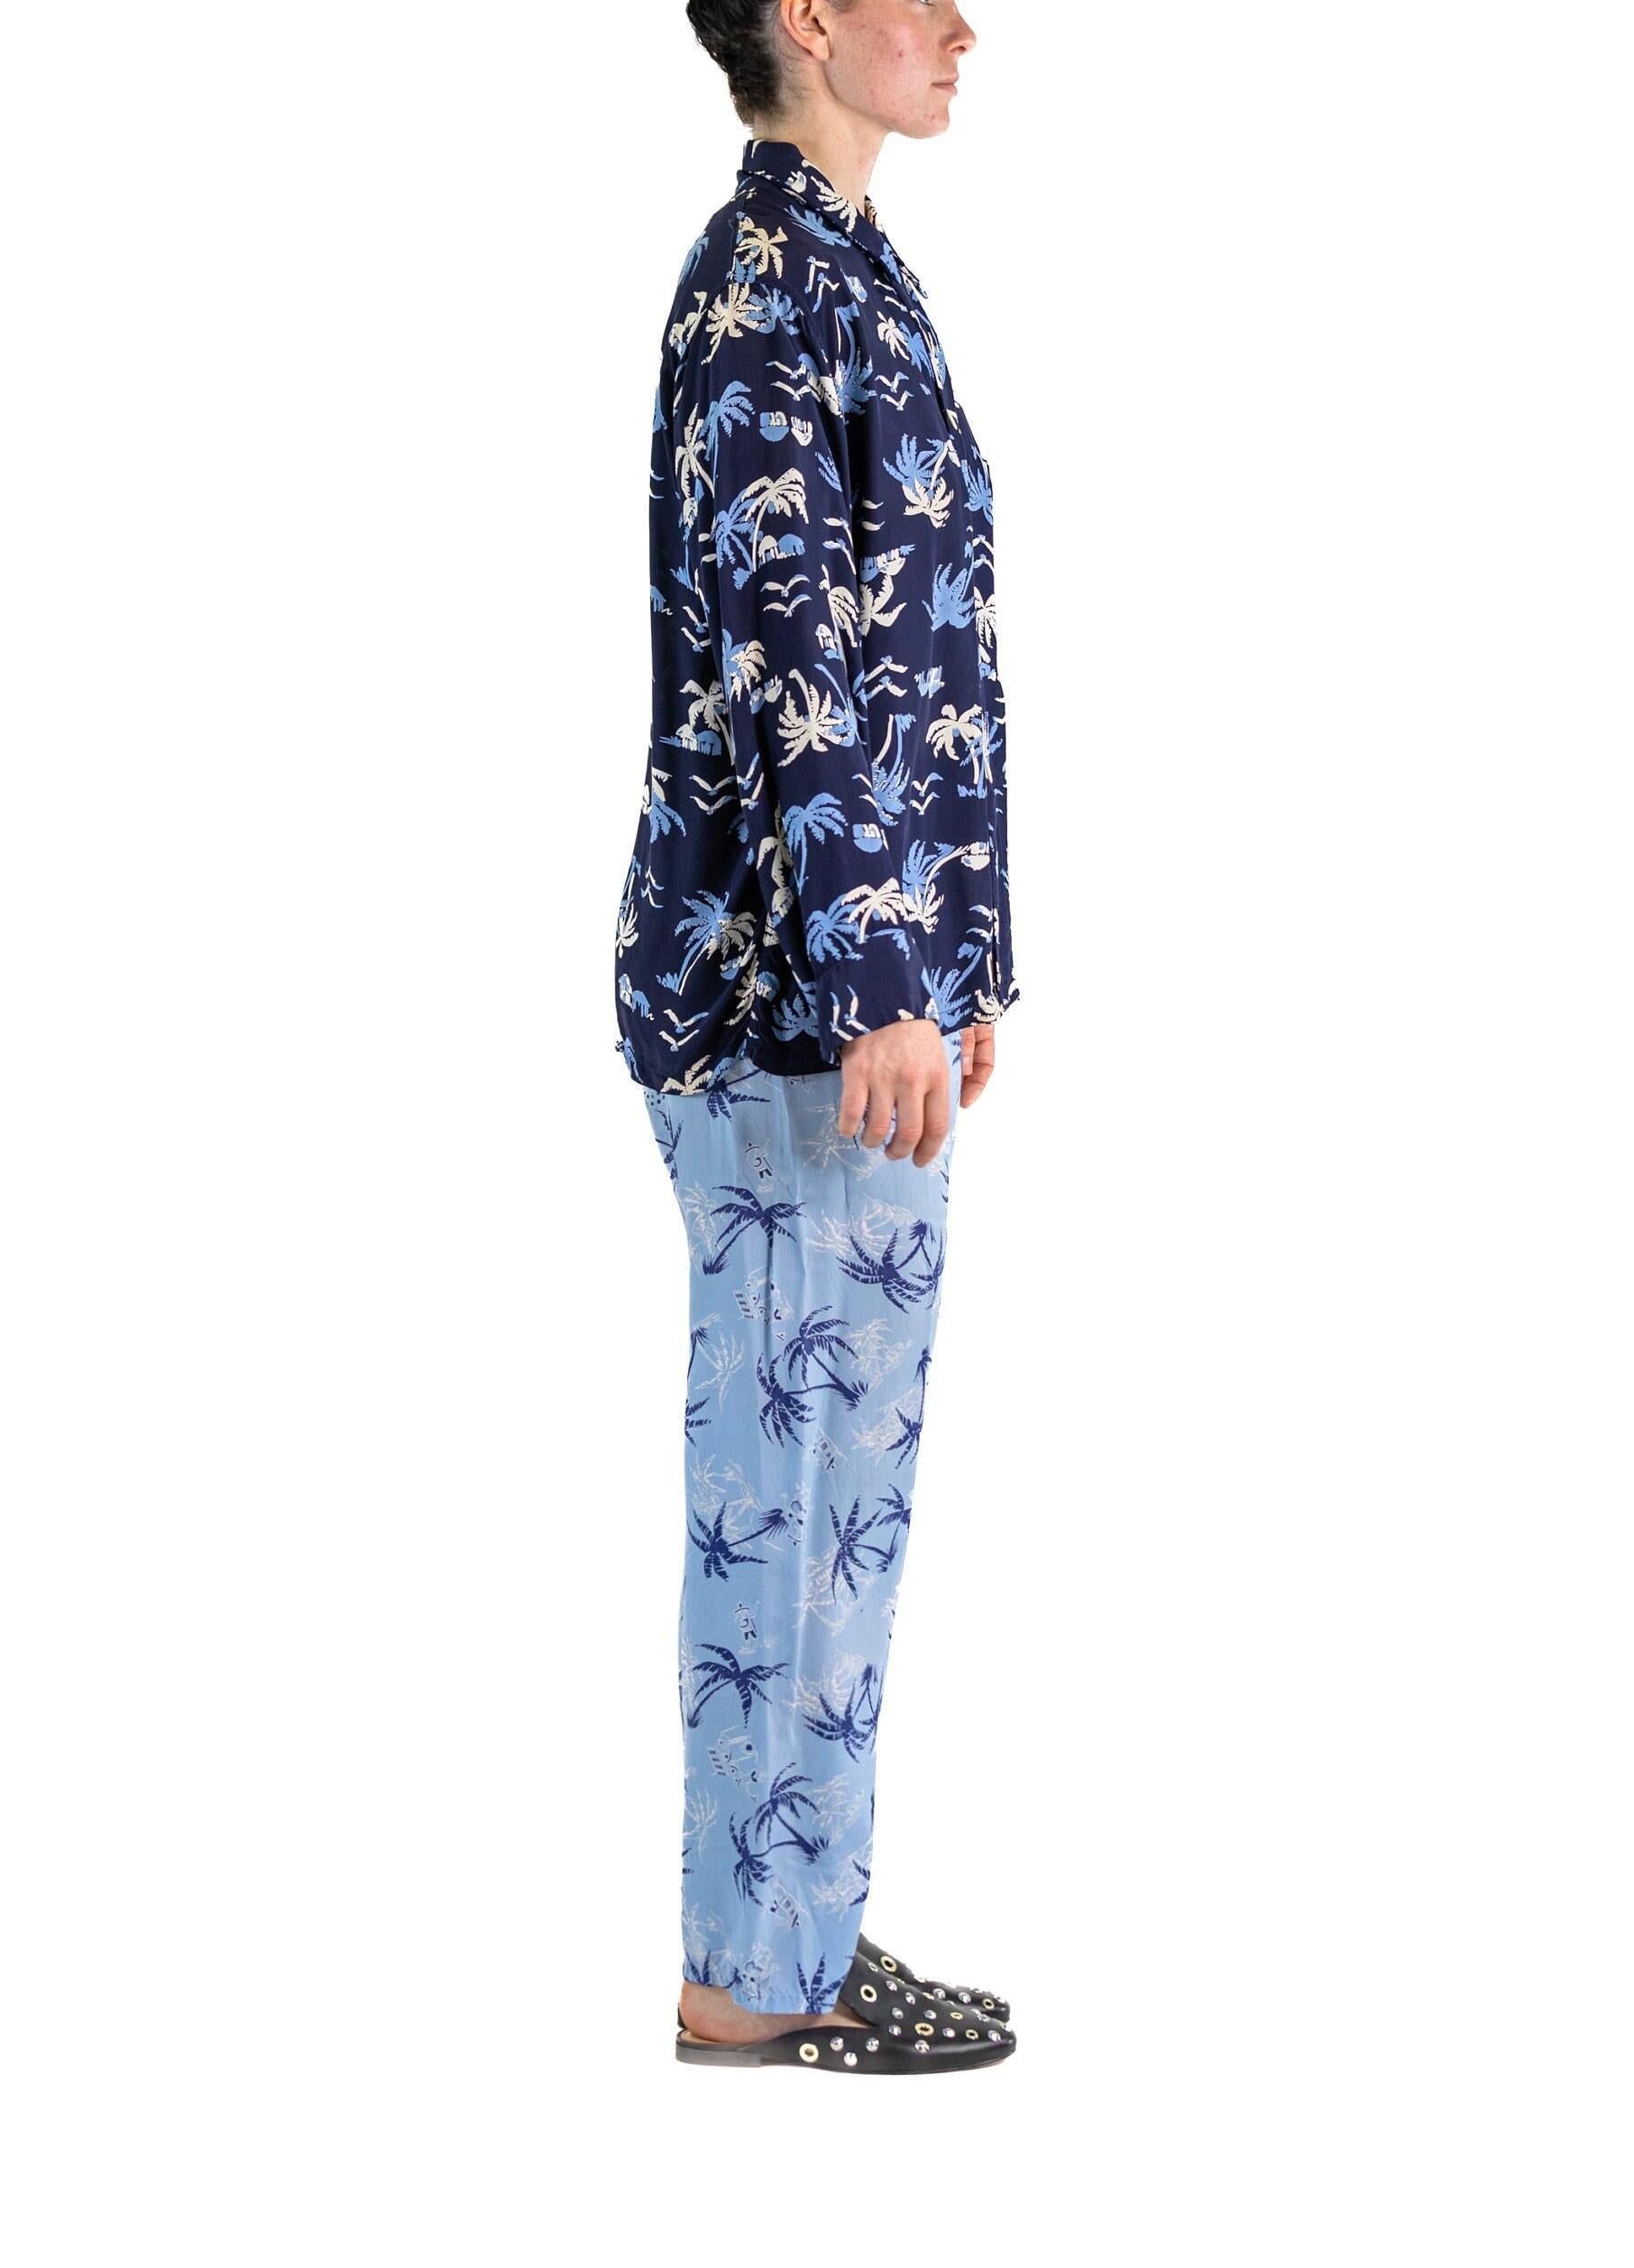 1940S BULLOCKS Navy Blue Rayon White Palm Tree Top & Pant Set In Excellent Condition For Sale In New York, NY